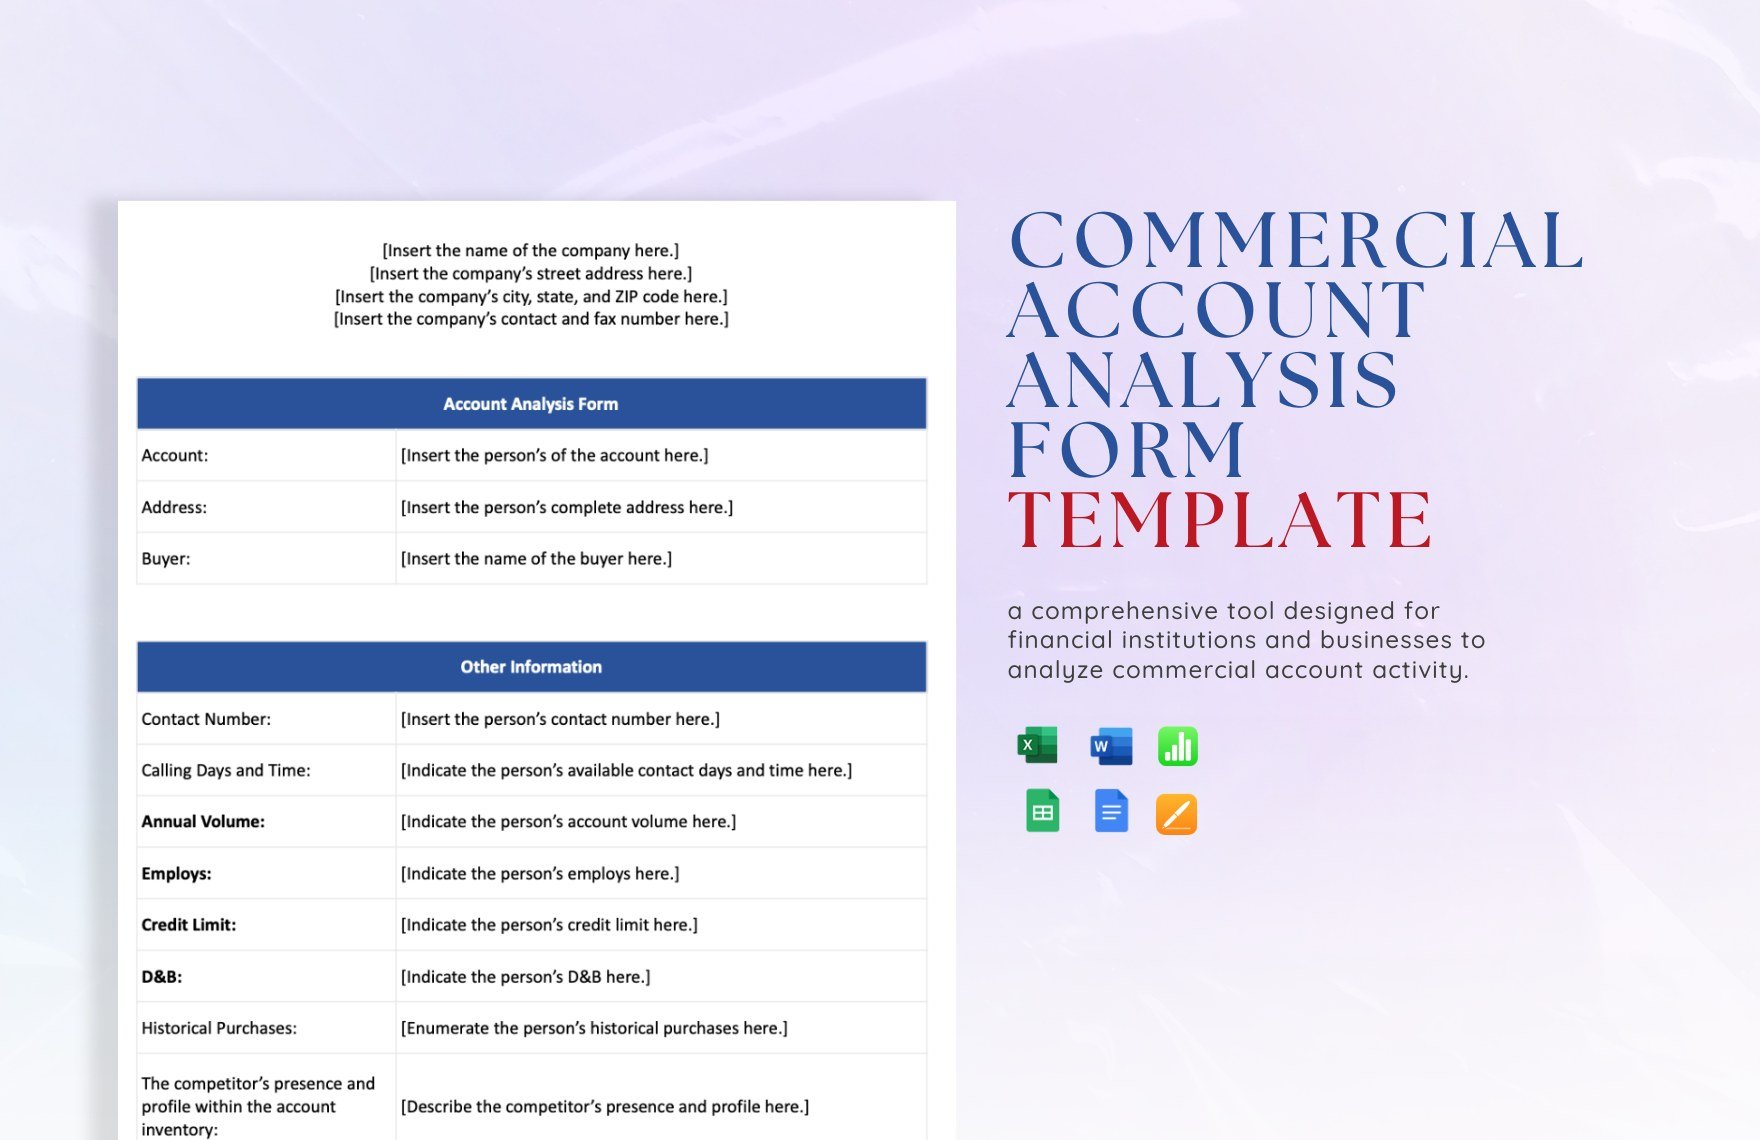 Commercial Account Analysis Form Template in Word, Google Docs, Excel, Google Sheets, Apple Pages, Apple Numbers